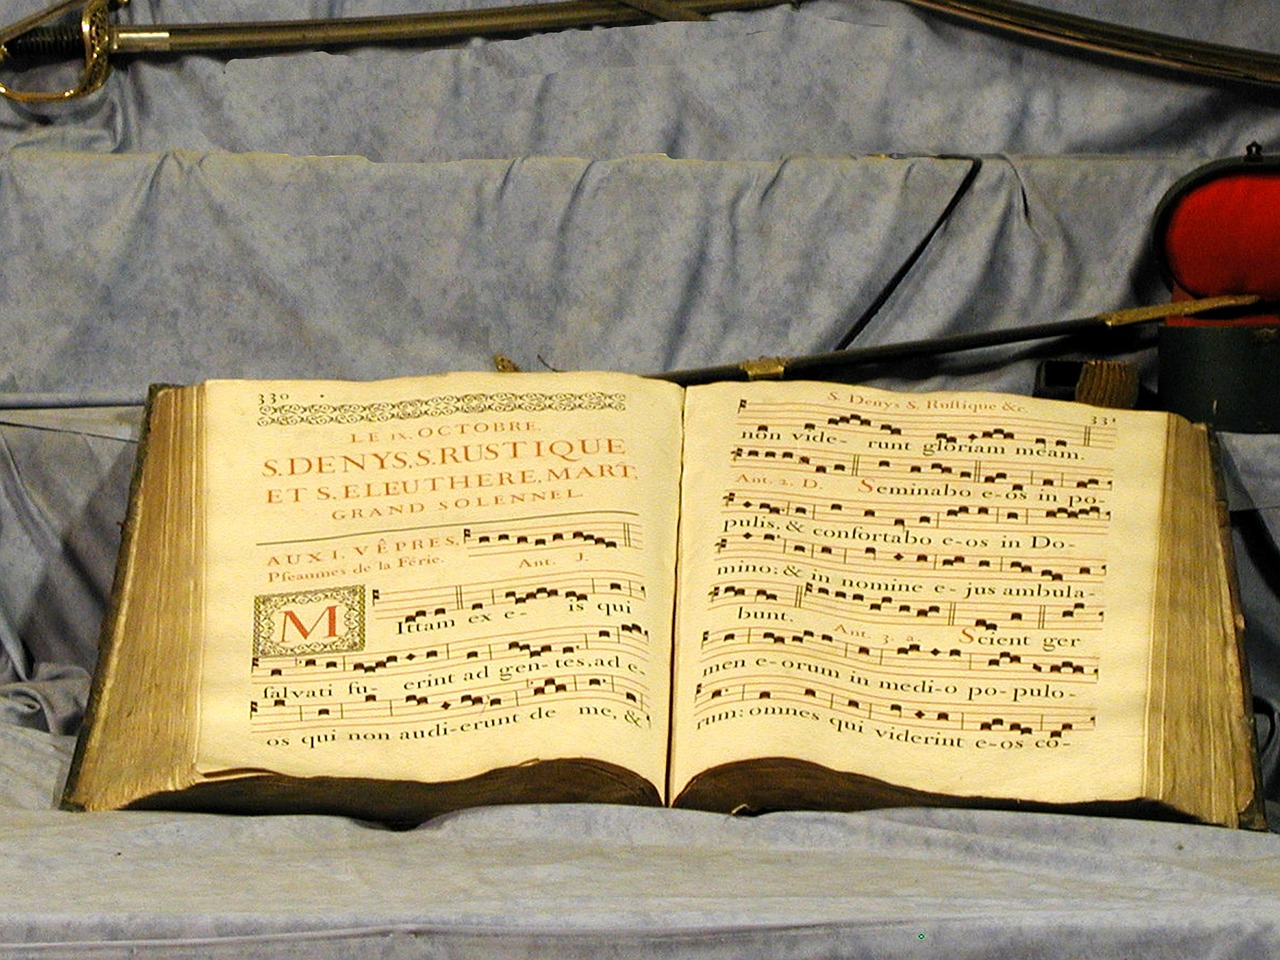 an open book sitting on top of a bed, by Johannes Martini, flickr, baroque, musical instrument, choir, auction catalogue photo, mickael lelièvre